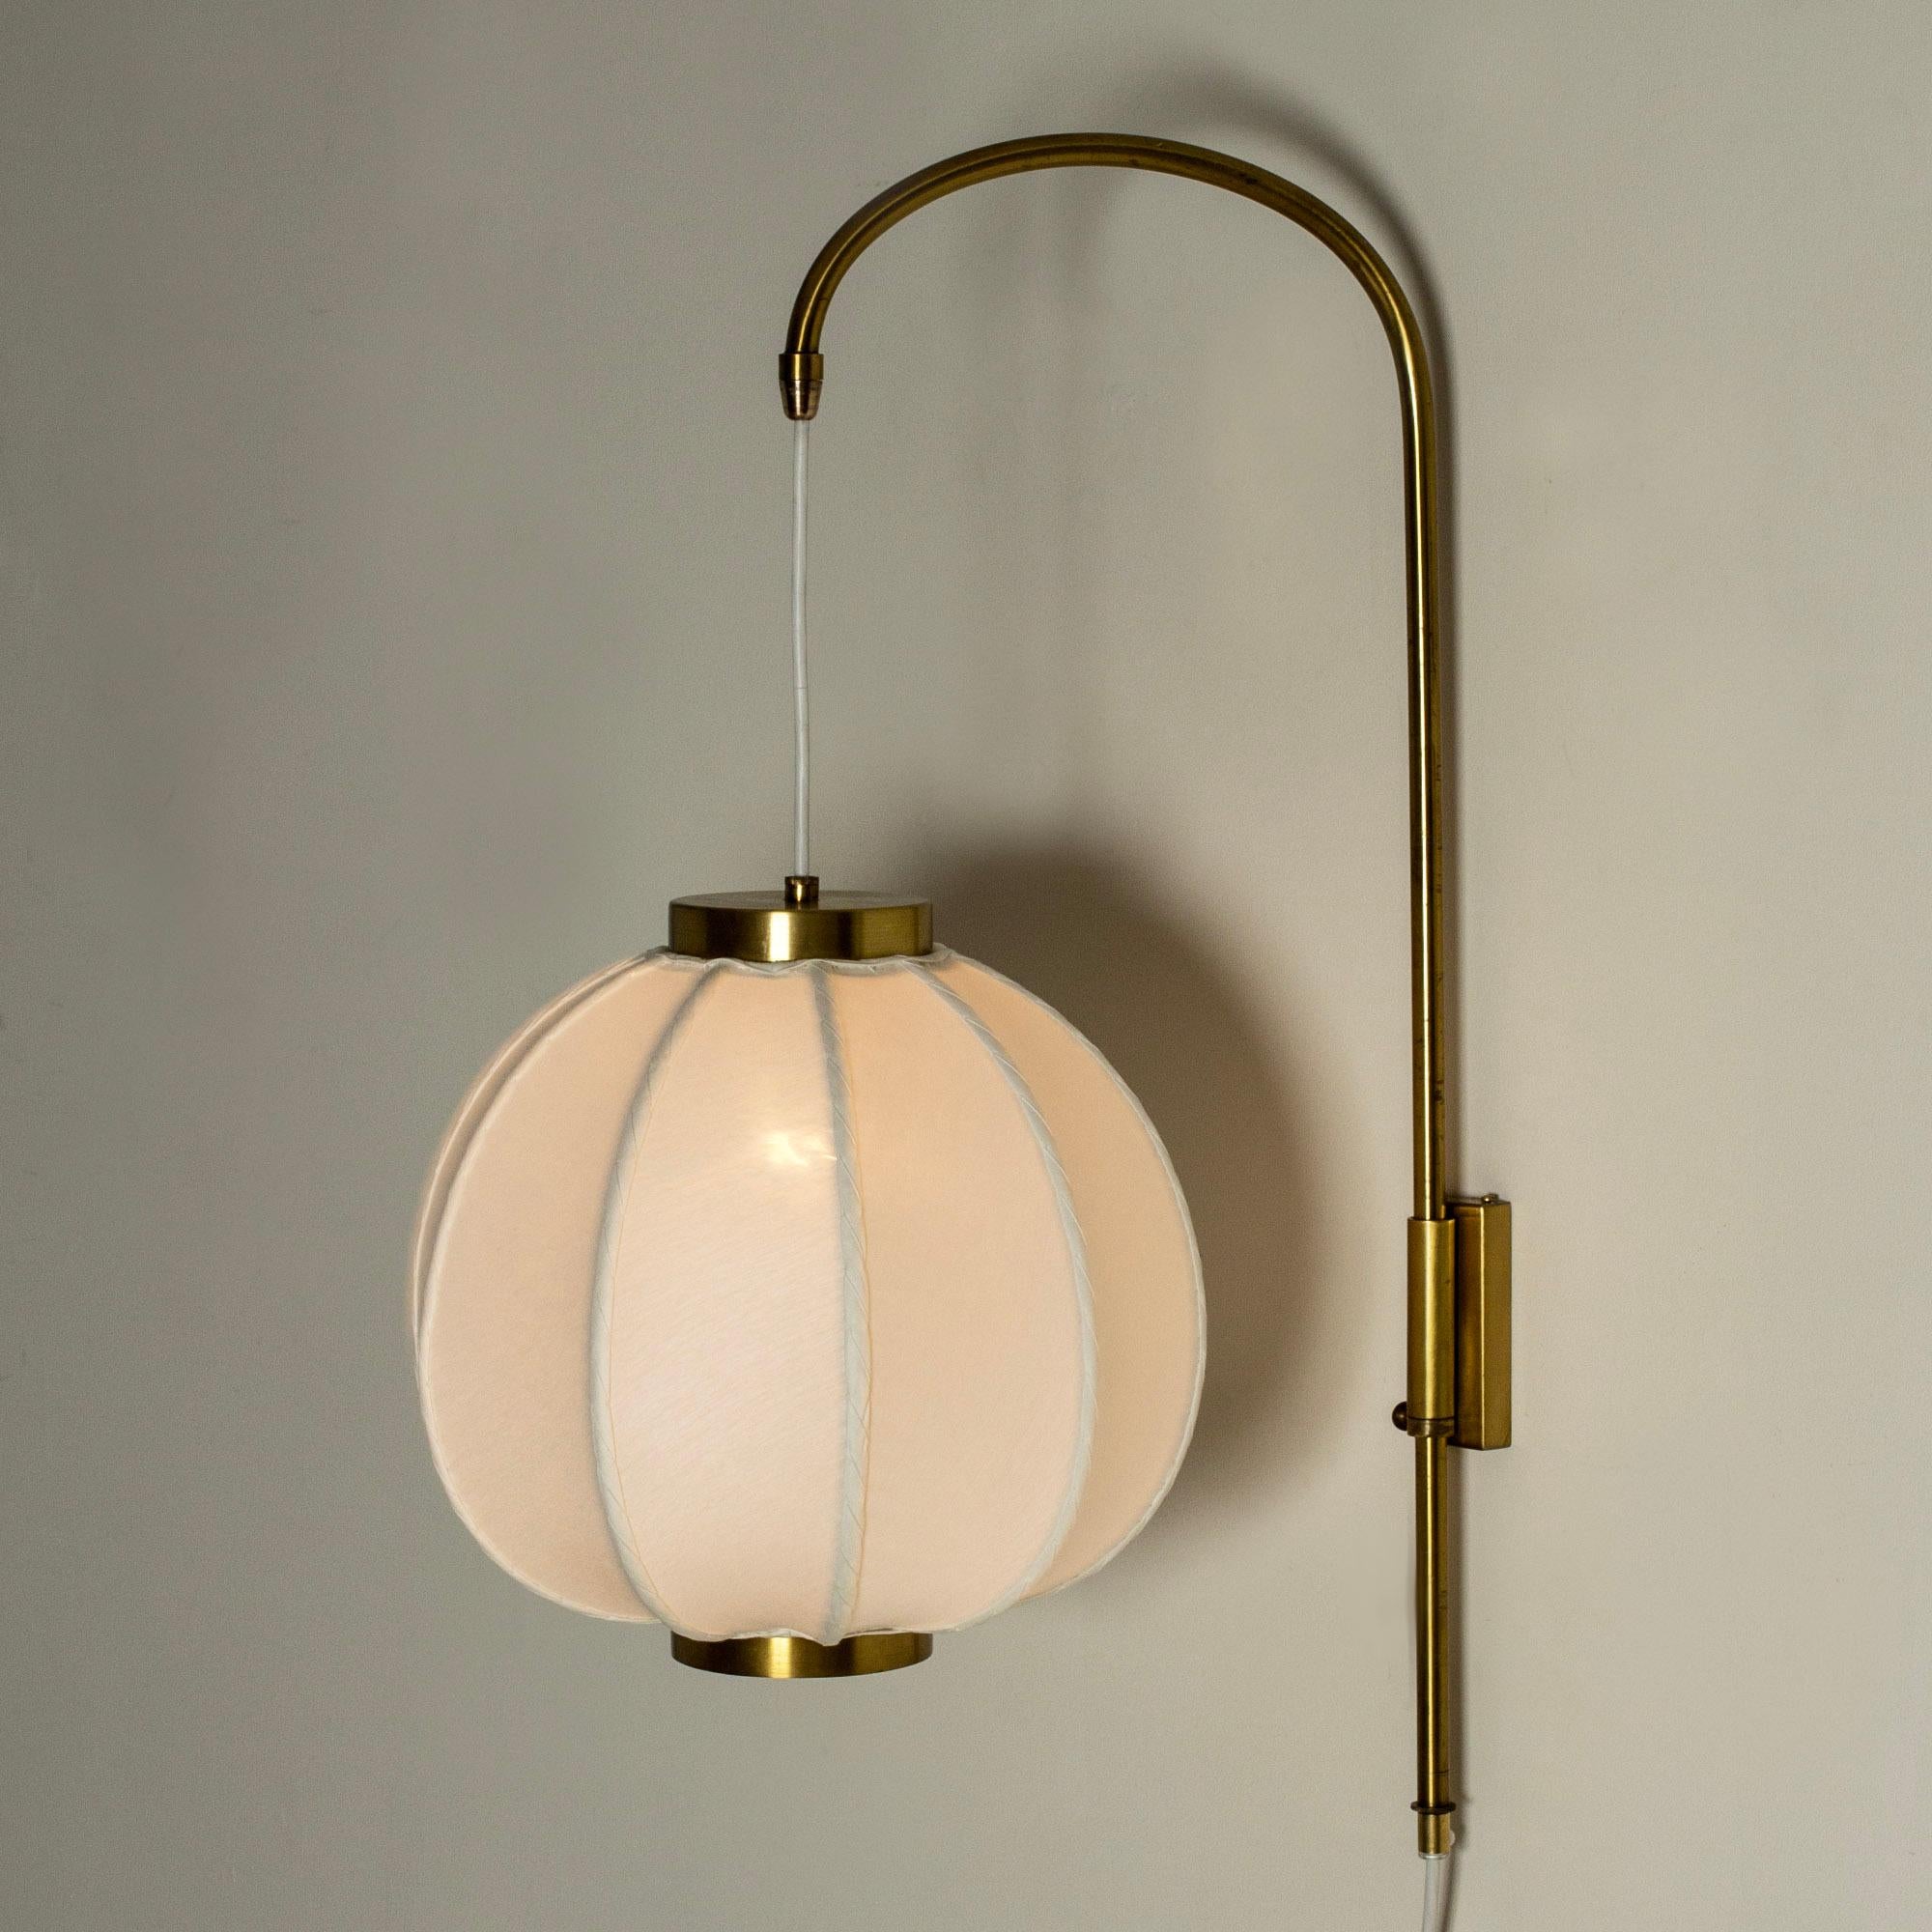 Rare, beautiful wall light by Josef Frank, made from brass with a slender stem suspending a voluminous lamp shade. Adjustable height.